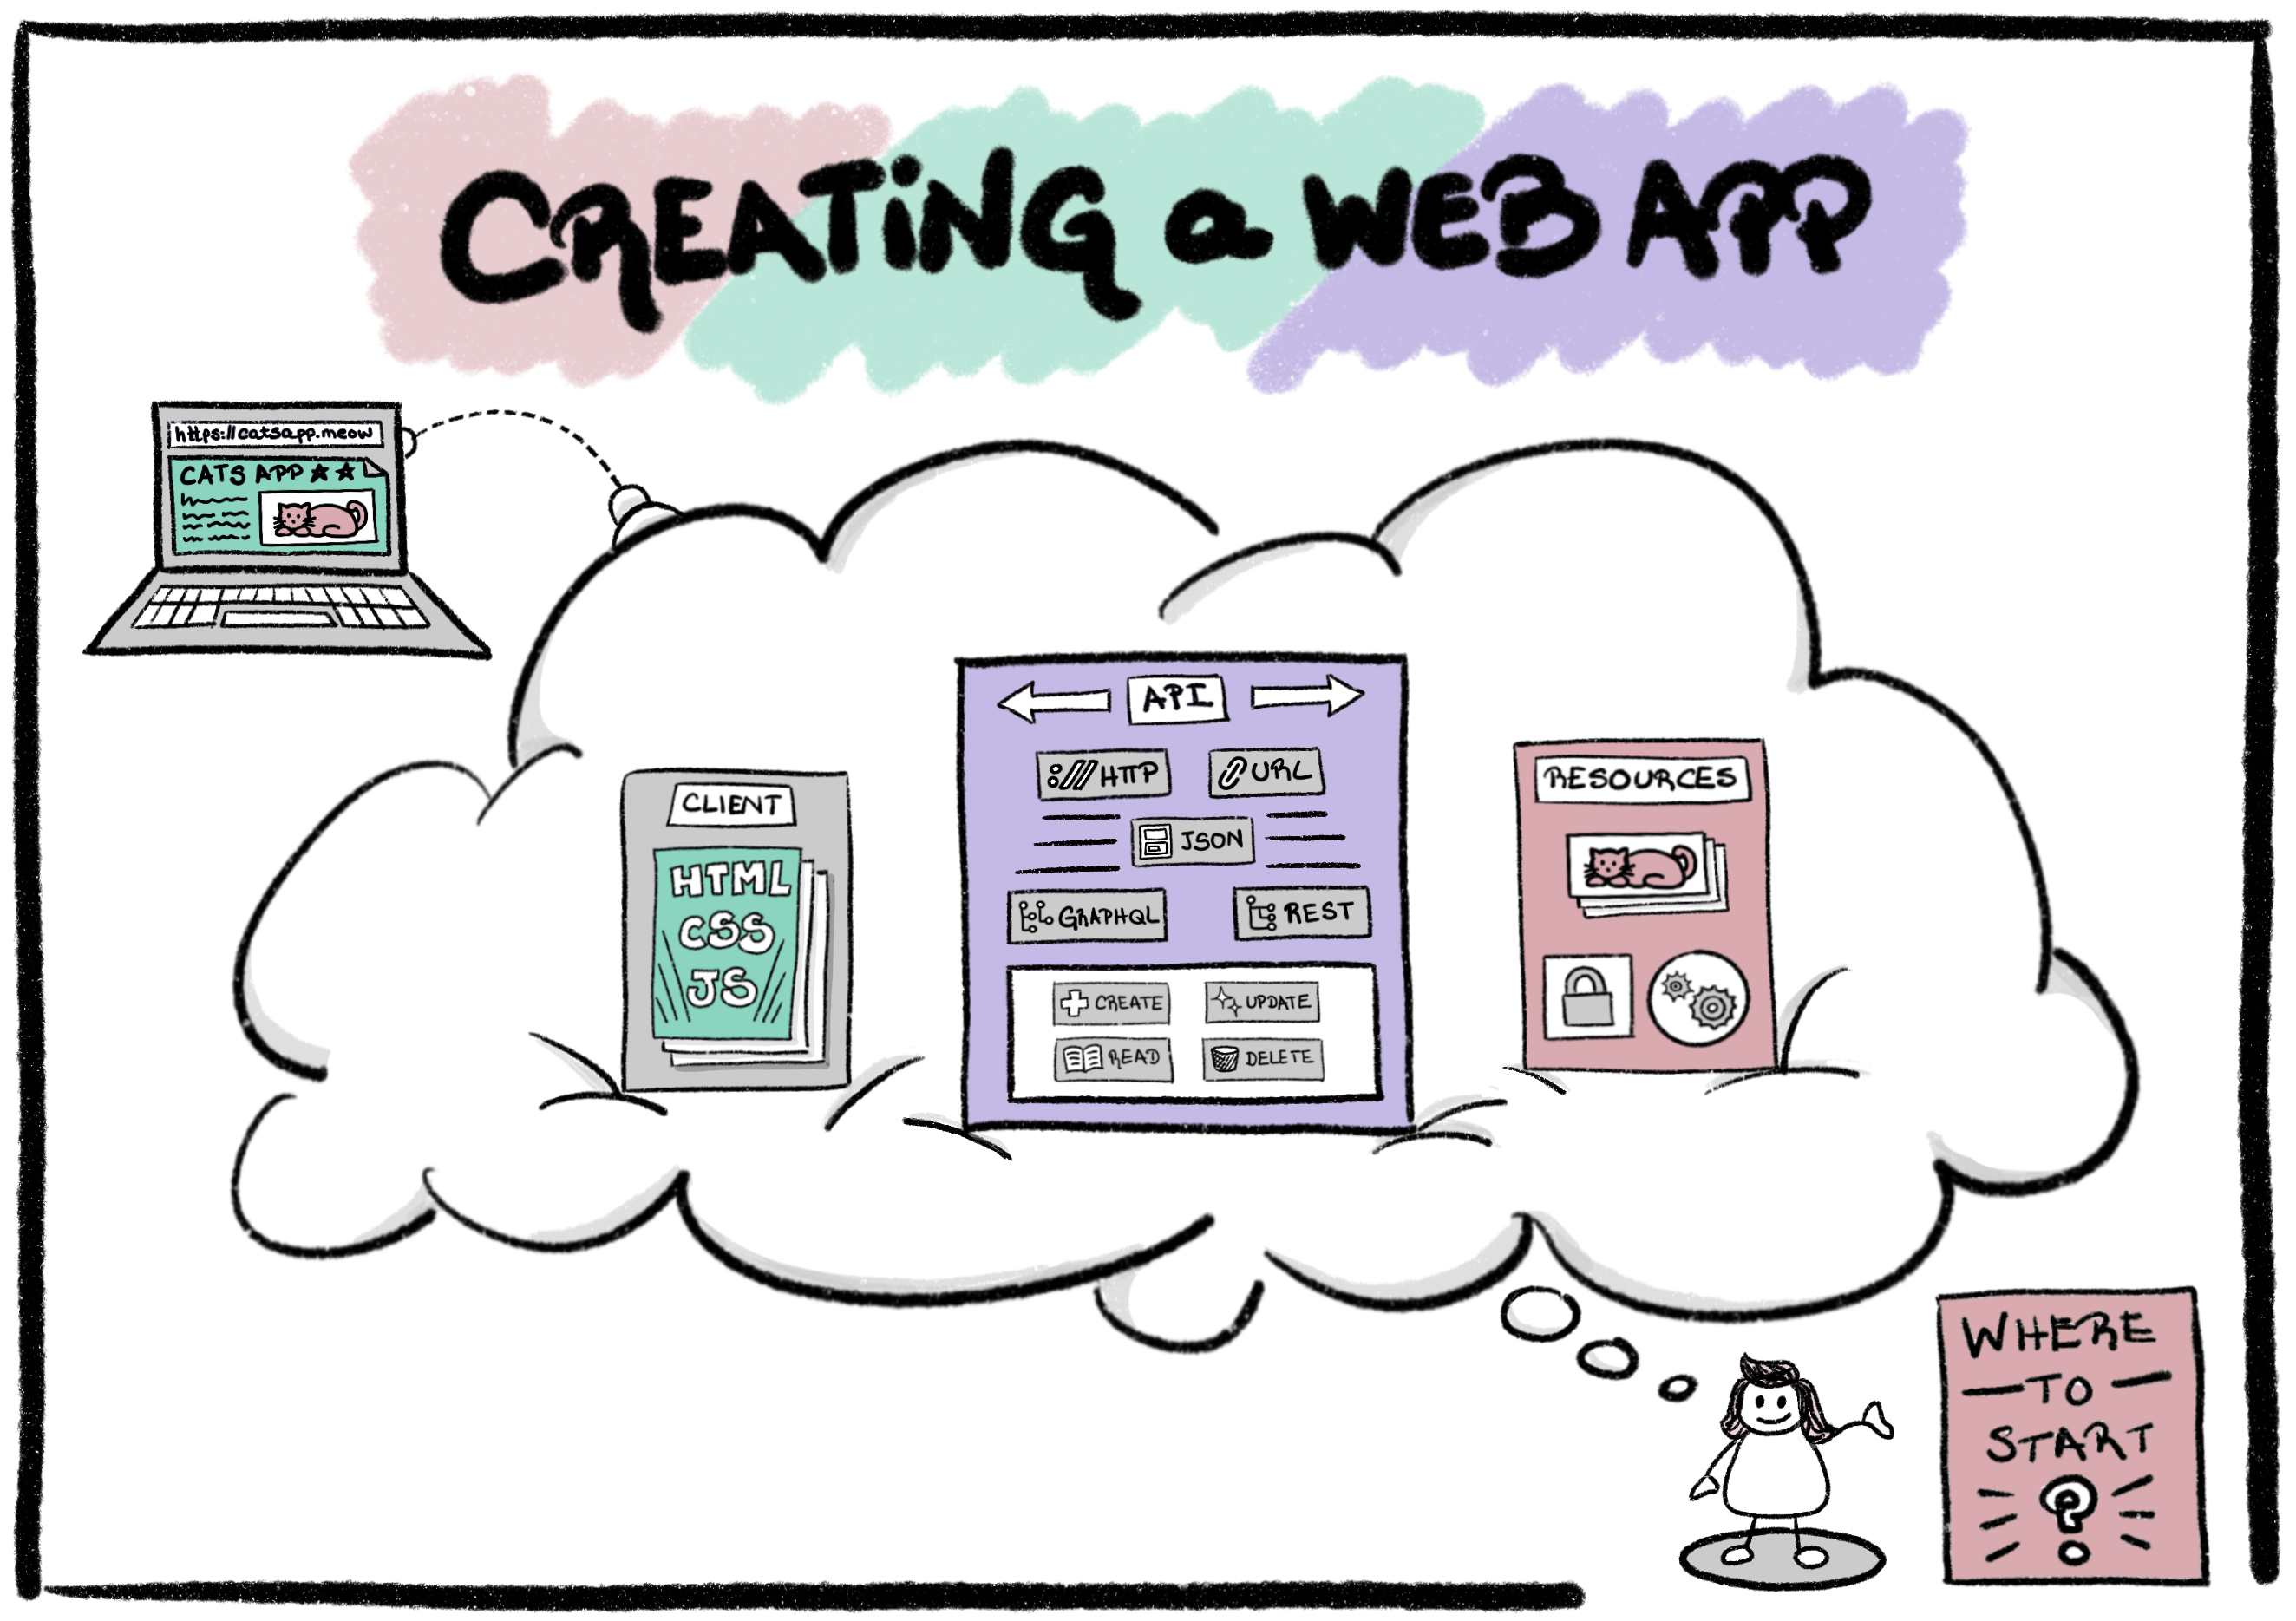 A drawing: "Creating a web app. Where to Start ?" asks a girl underneath a large cloud with a laptop connected to it and displaying an app in a browser. The cloud contains three boards: to the left is the CLIENT, which contains HTML, CSS, and JavaScript; to the right are RESOURCES which contain backend data and application logic; in the middle is the API, which connects the CLIENT to the RESOURCES using HTTP, URLs, JSON, REST, GraphQL, and enables calls to CRUD operations.